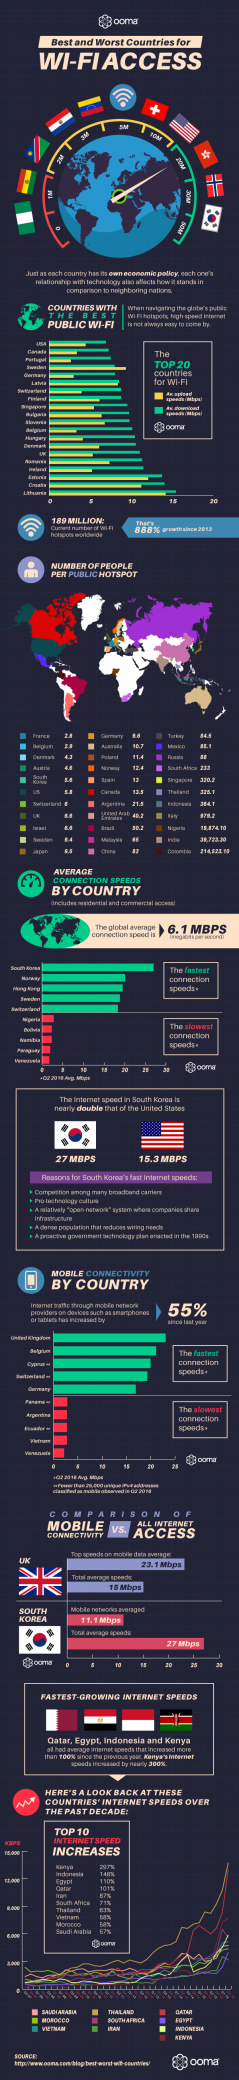 Best Proven Tactics for Using Public WiFi [Infographic]